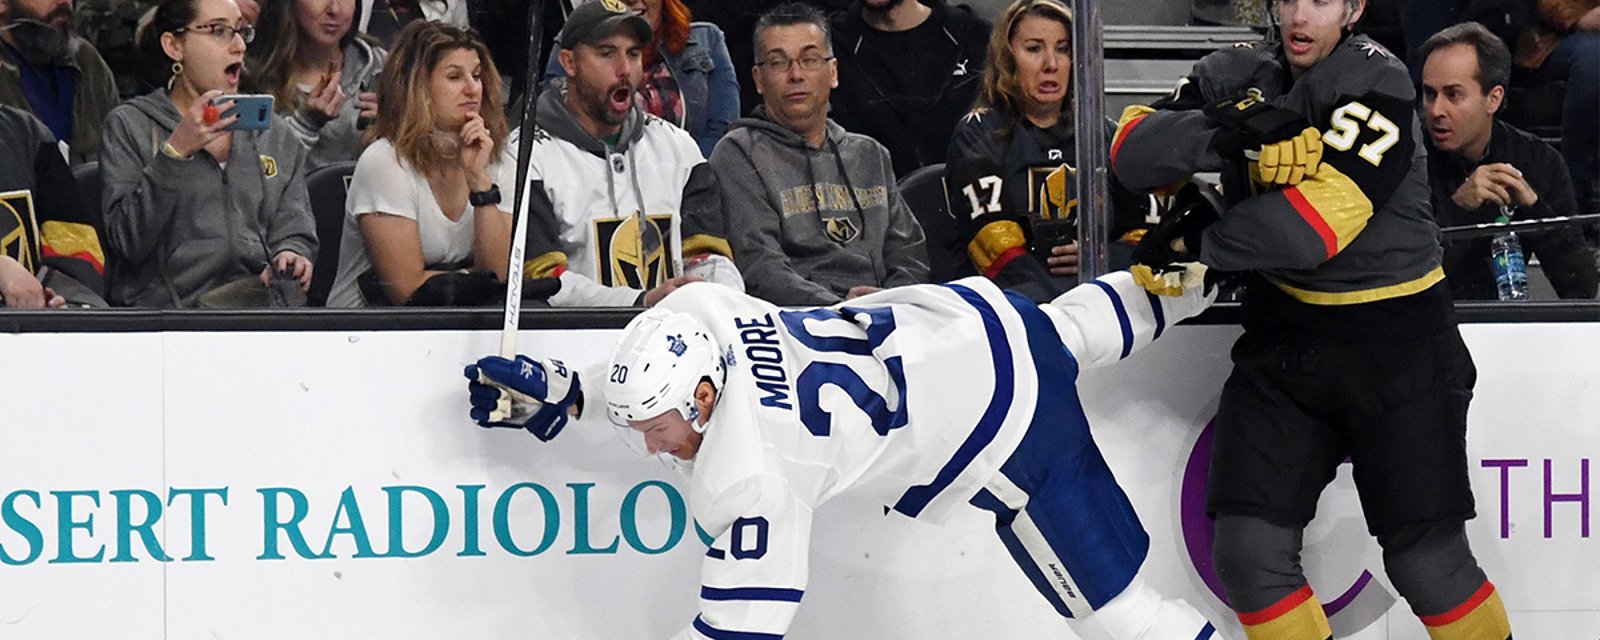 Report: Ray Ferraro rips Leafs’ recent performance